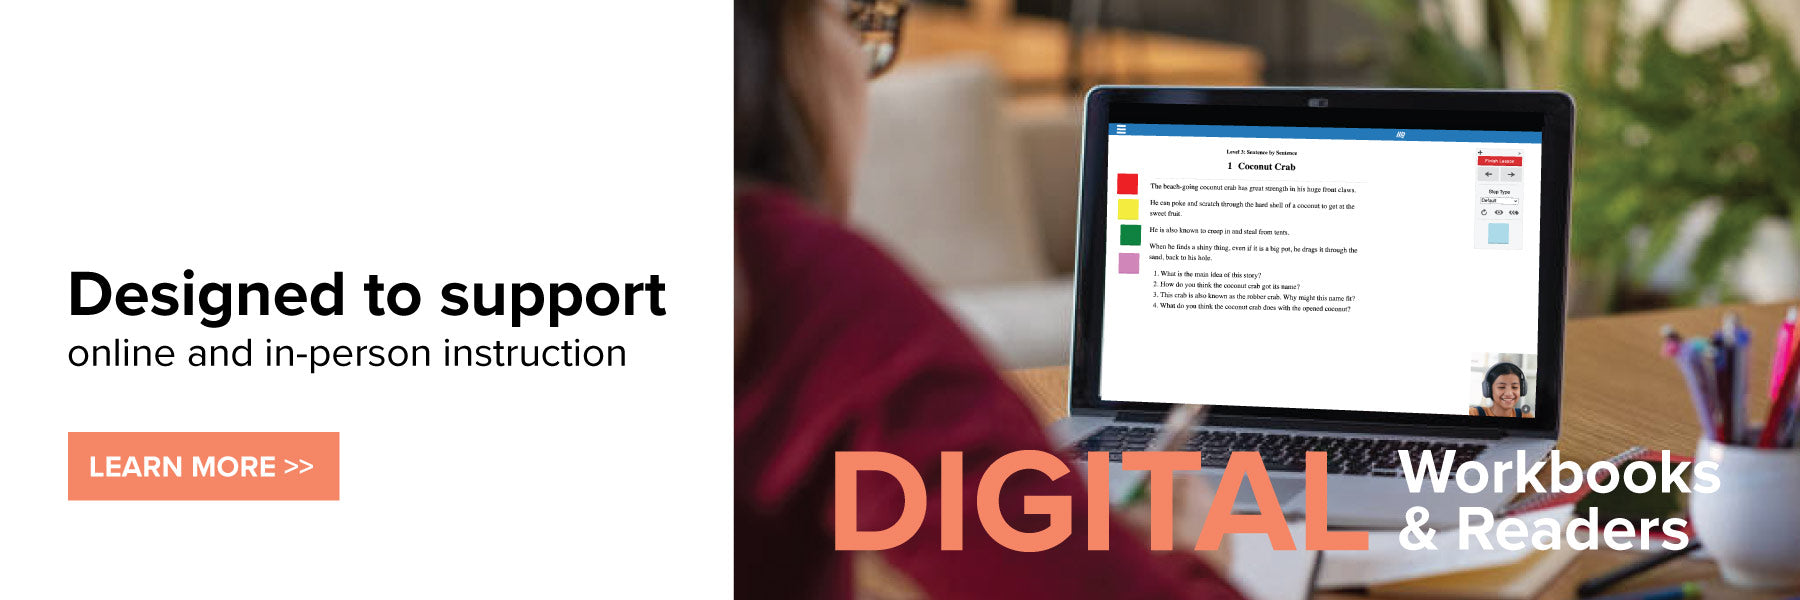 Digital Workbooks & Readers, Designed to support online and in-person instruction